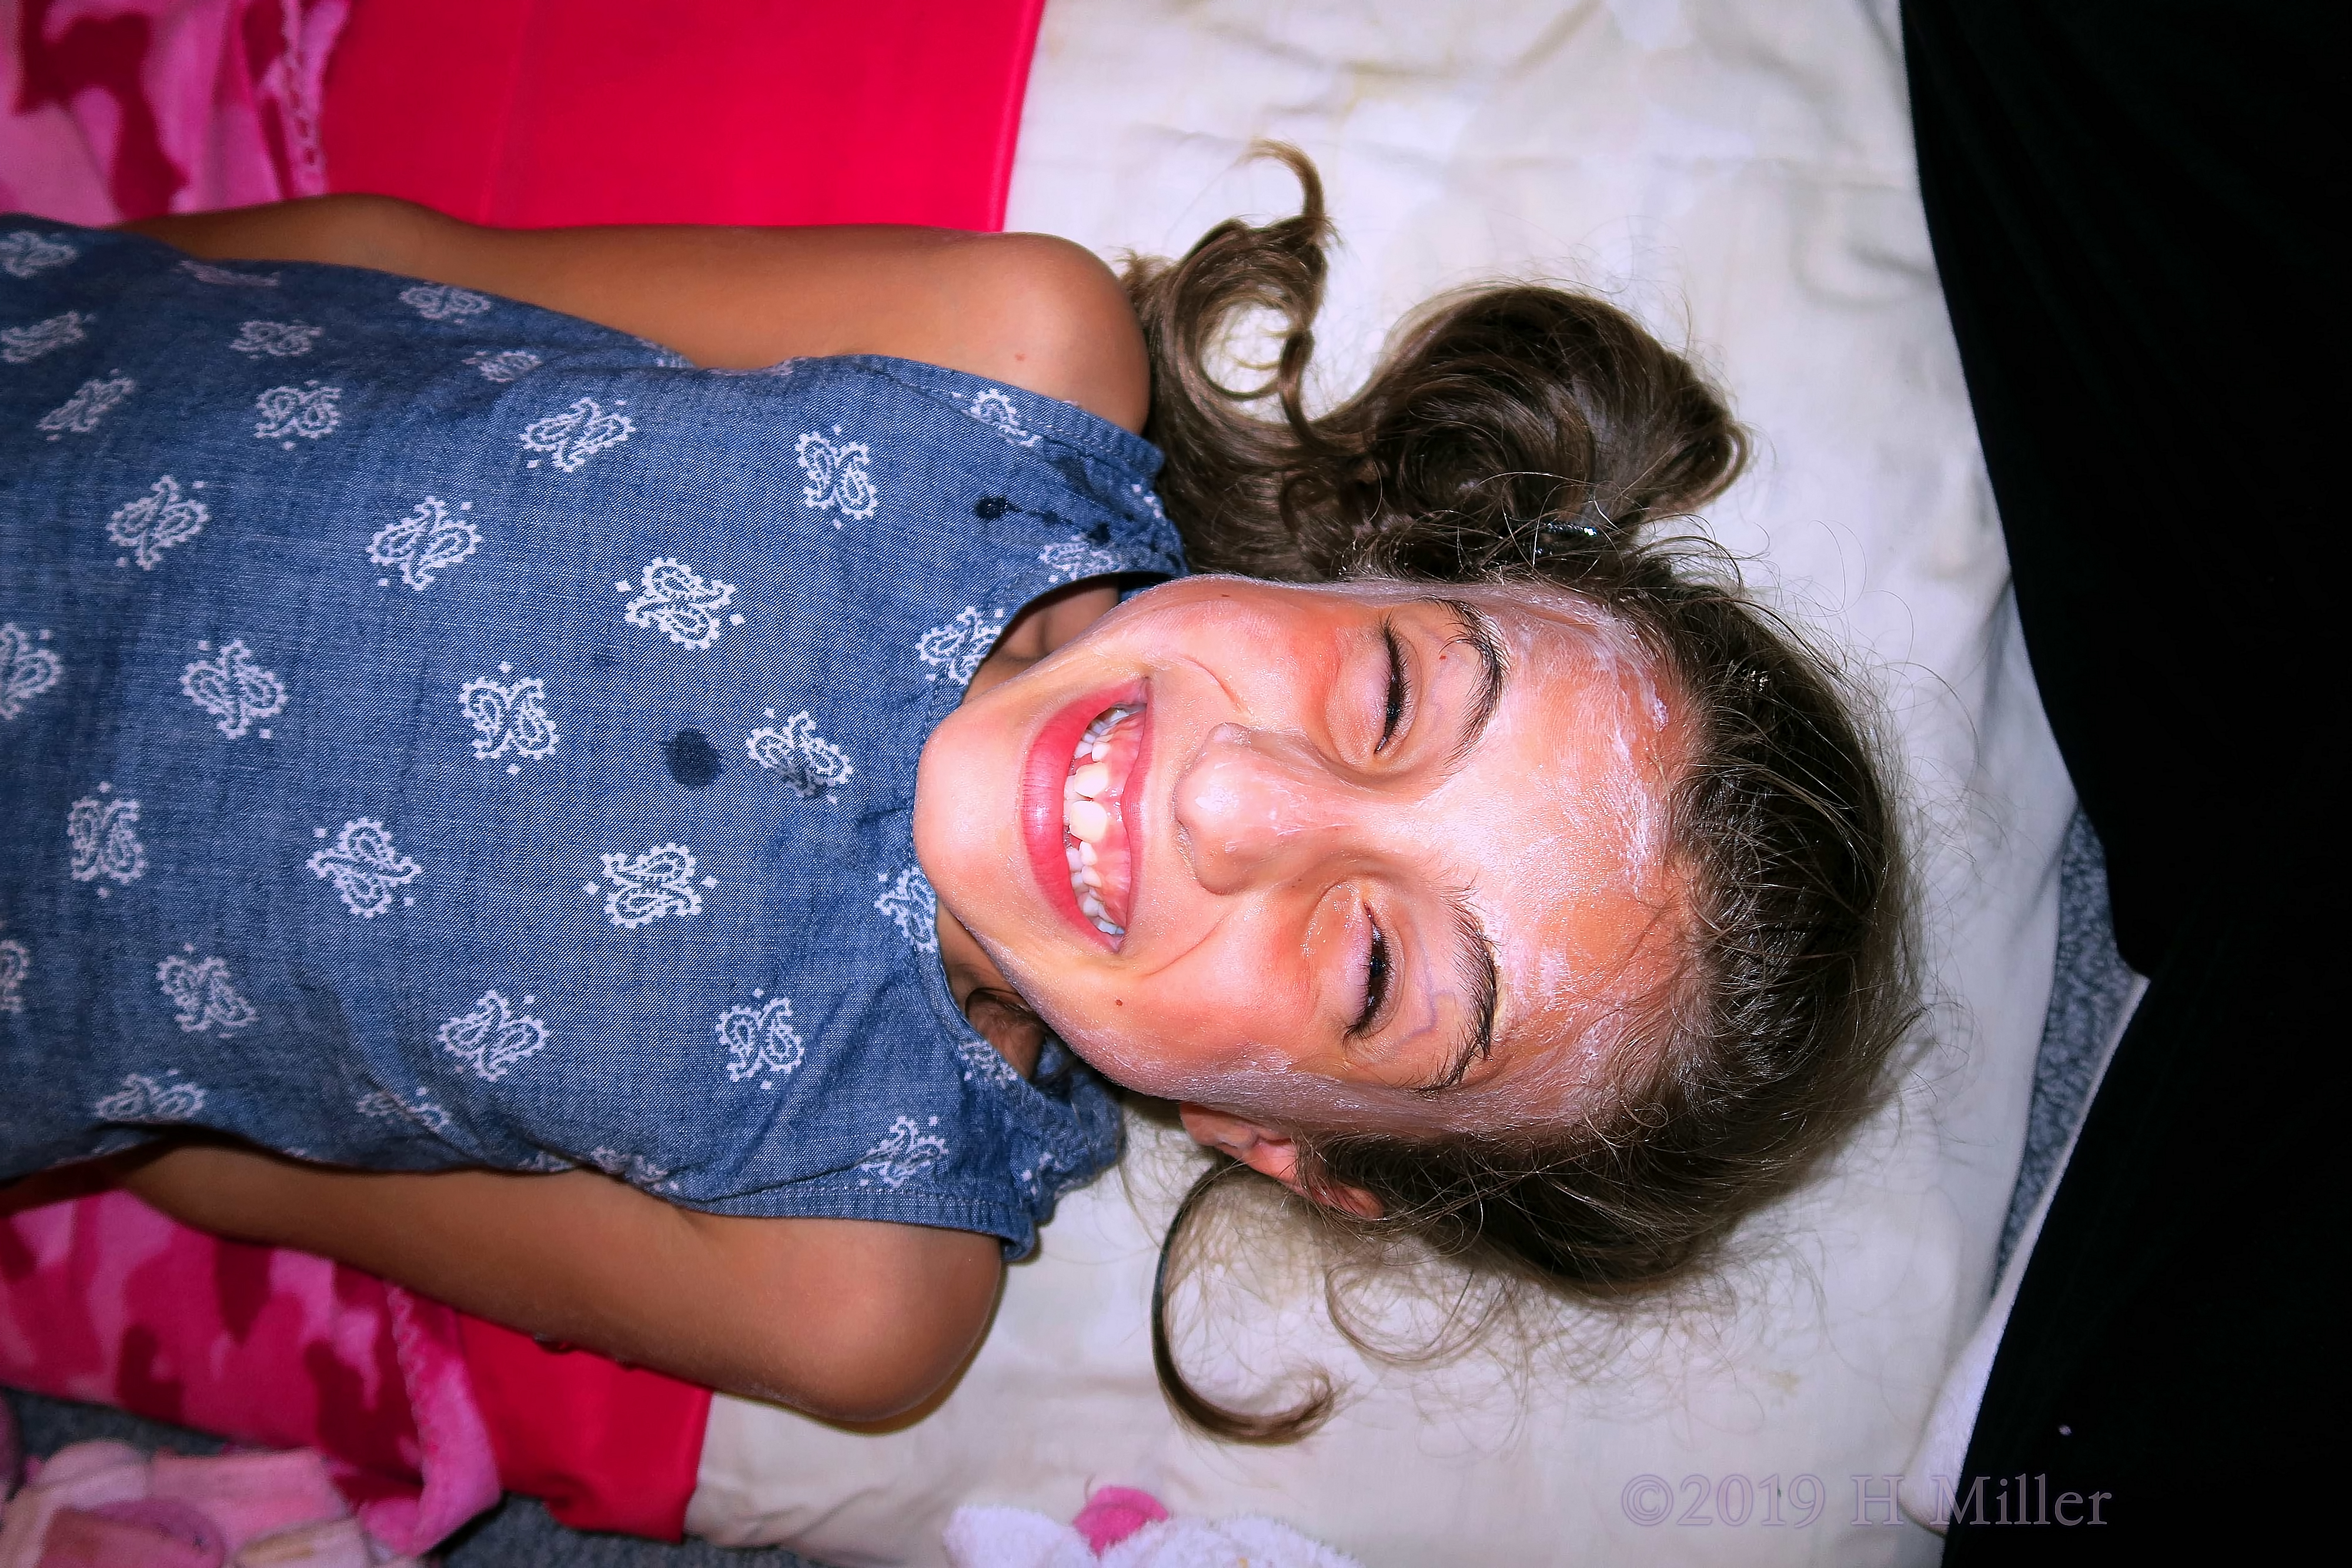 Enthusiastic Excitement! Kids Facials At The Spa For Girls! 4